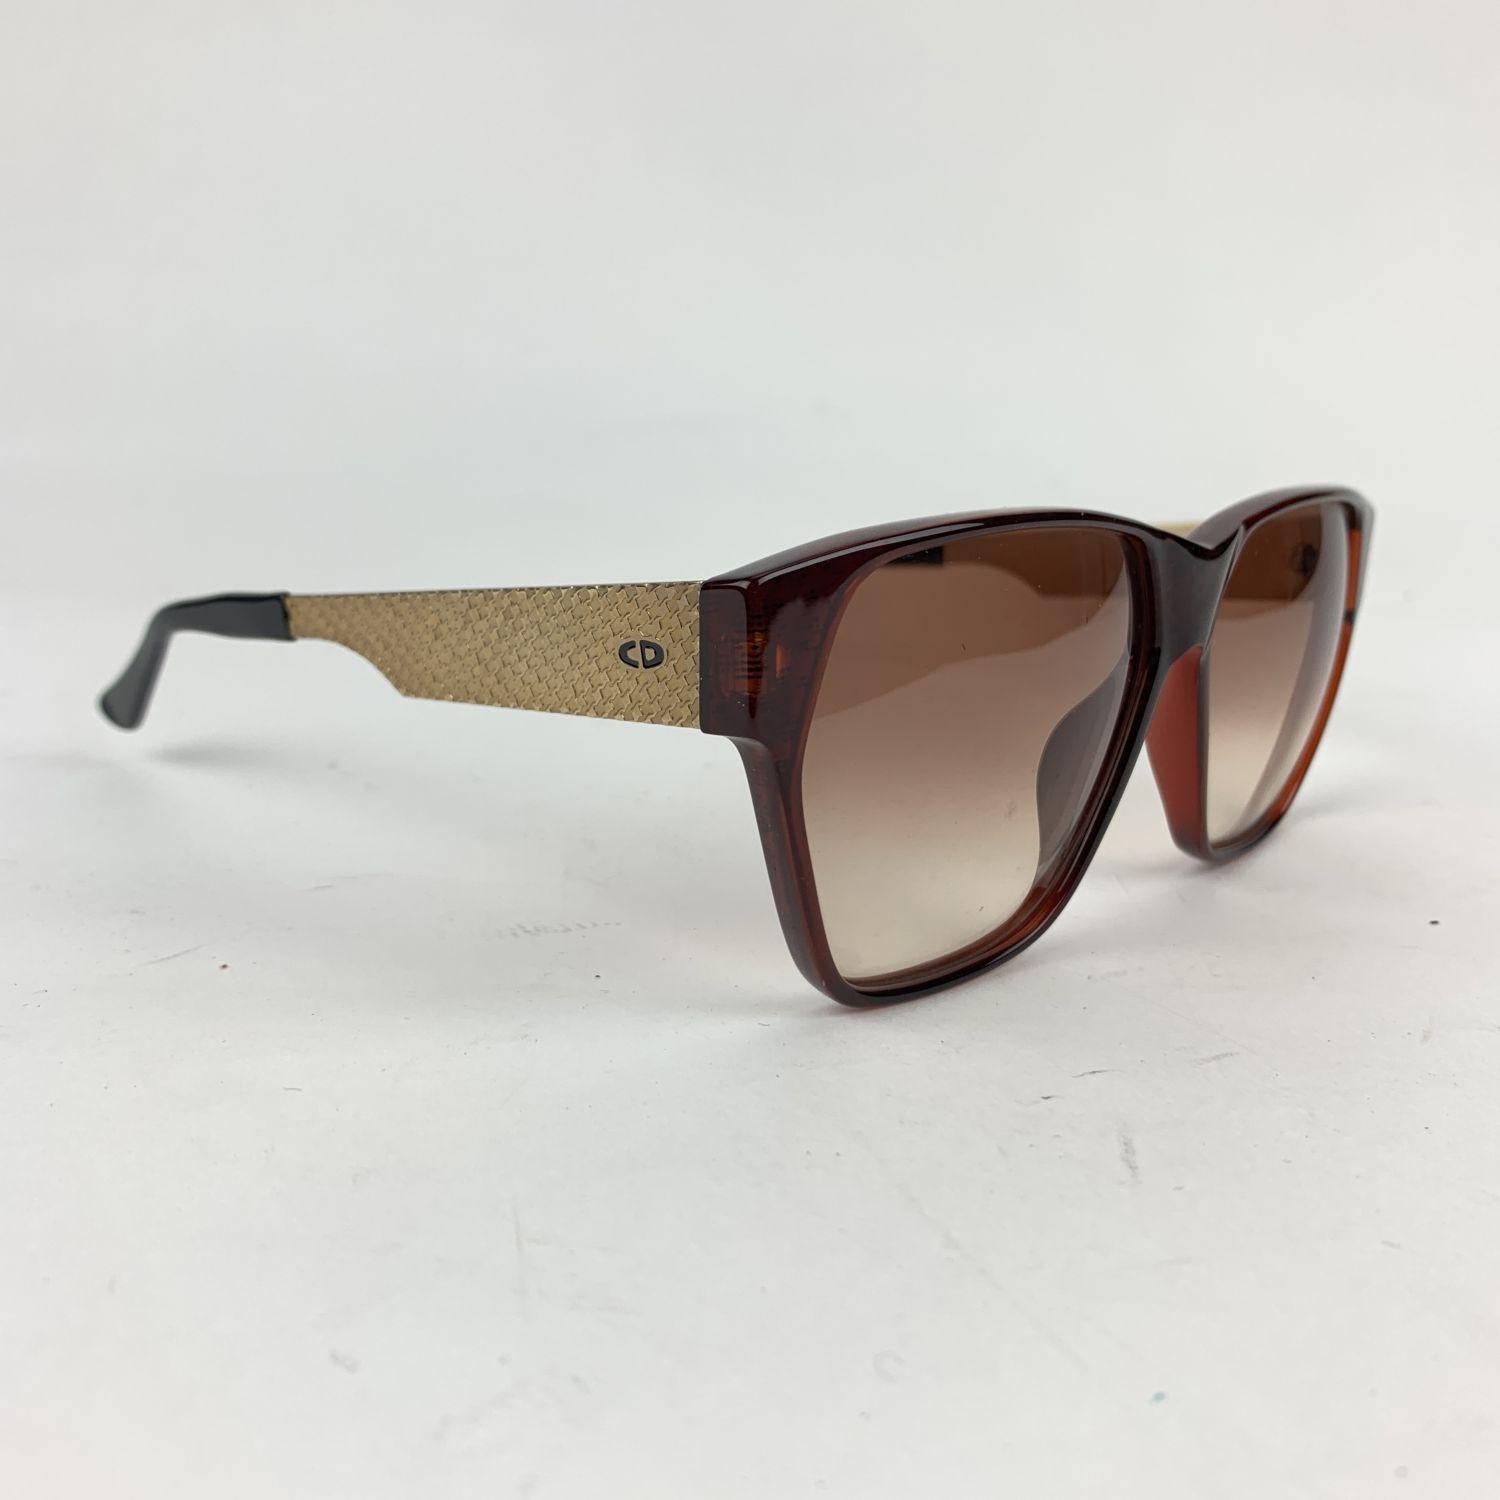 Christian Dior Vintage Sunglasses, Model 2565 - 30. Brown Optyl frame, gold metal arms .CD logo on temples. Brown gradient lenses. Made in Germany. Style & Refs: 2565 - 30 - 135. Model recently worn by music star RIHANNA.